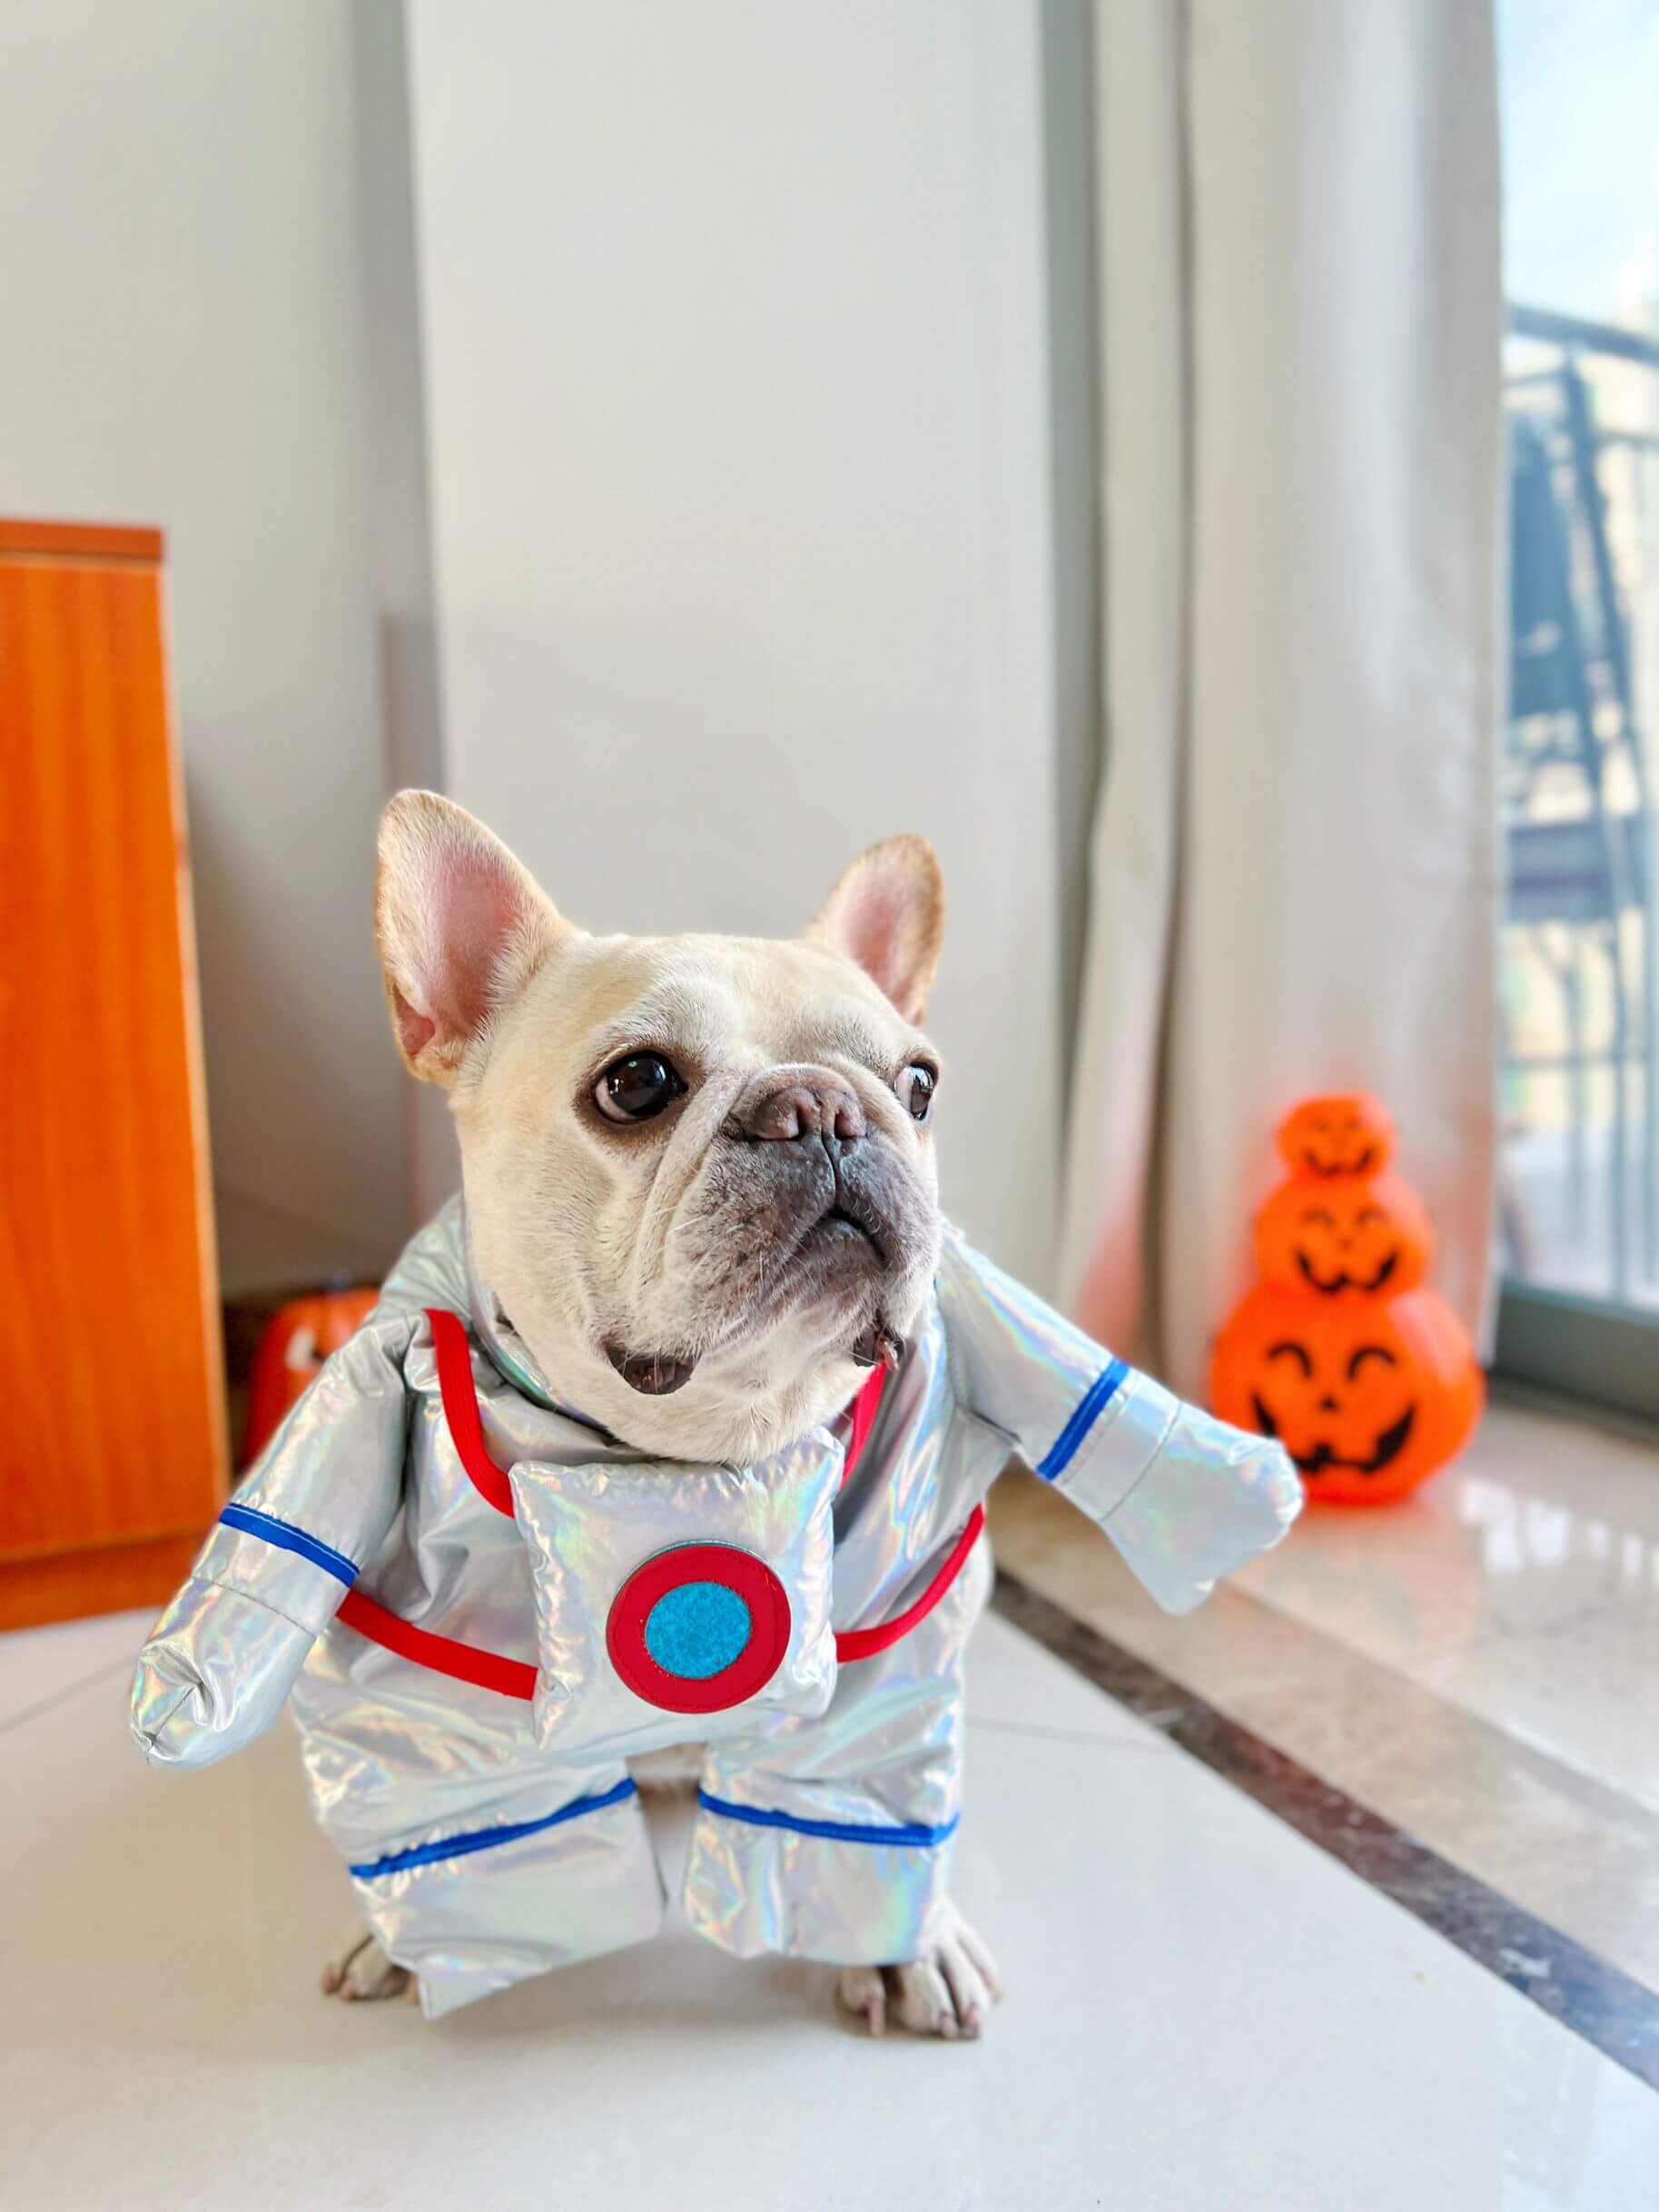 astronaut dog costume for sale